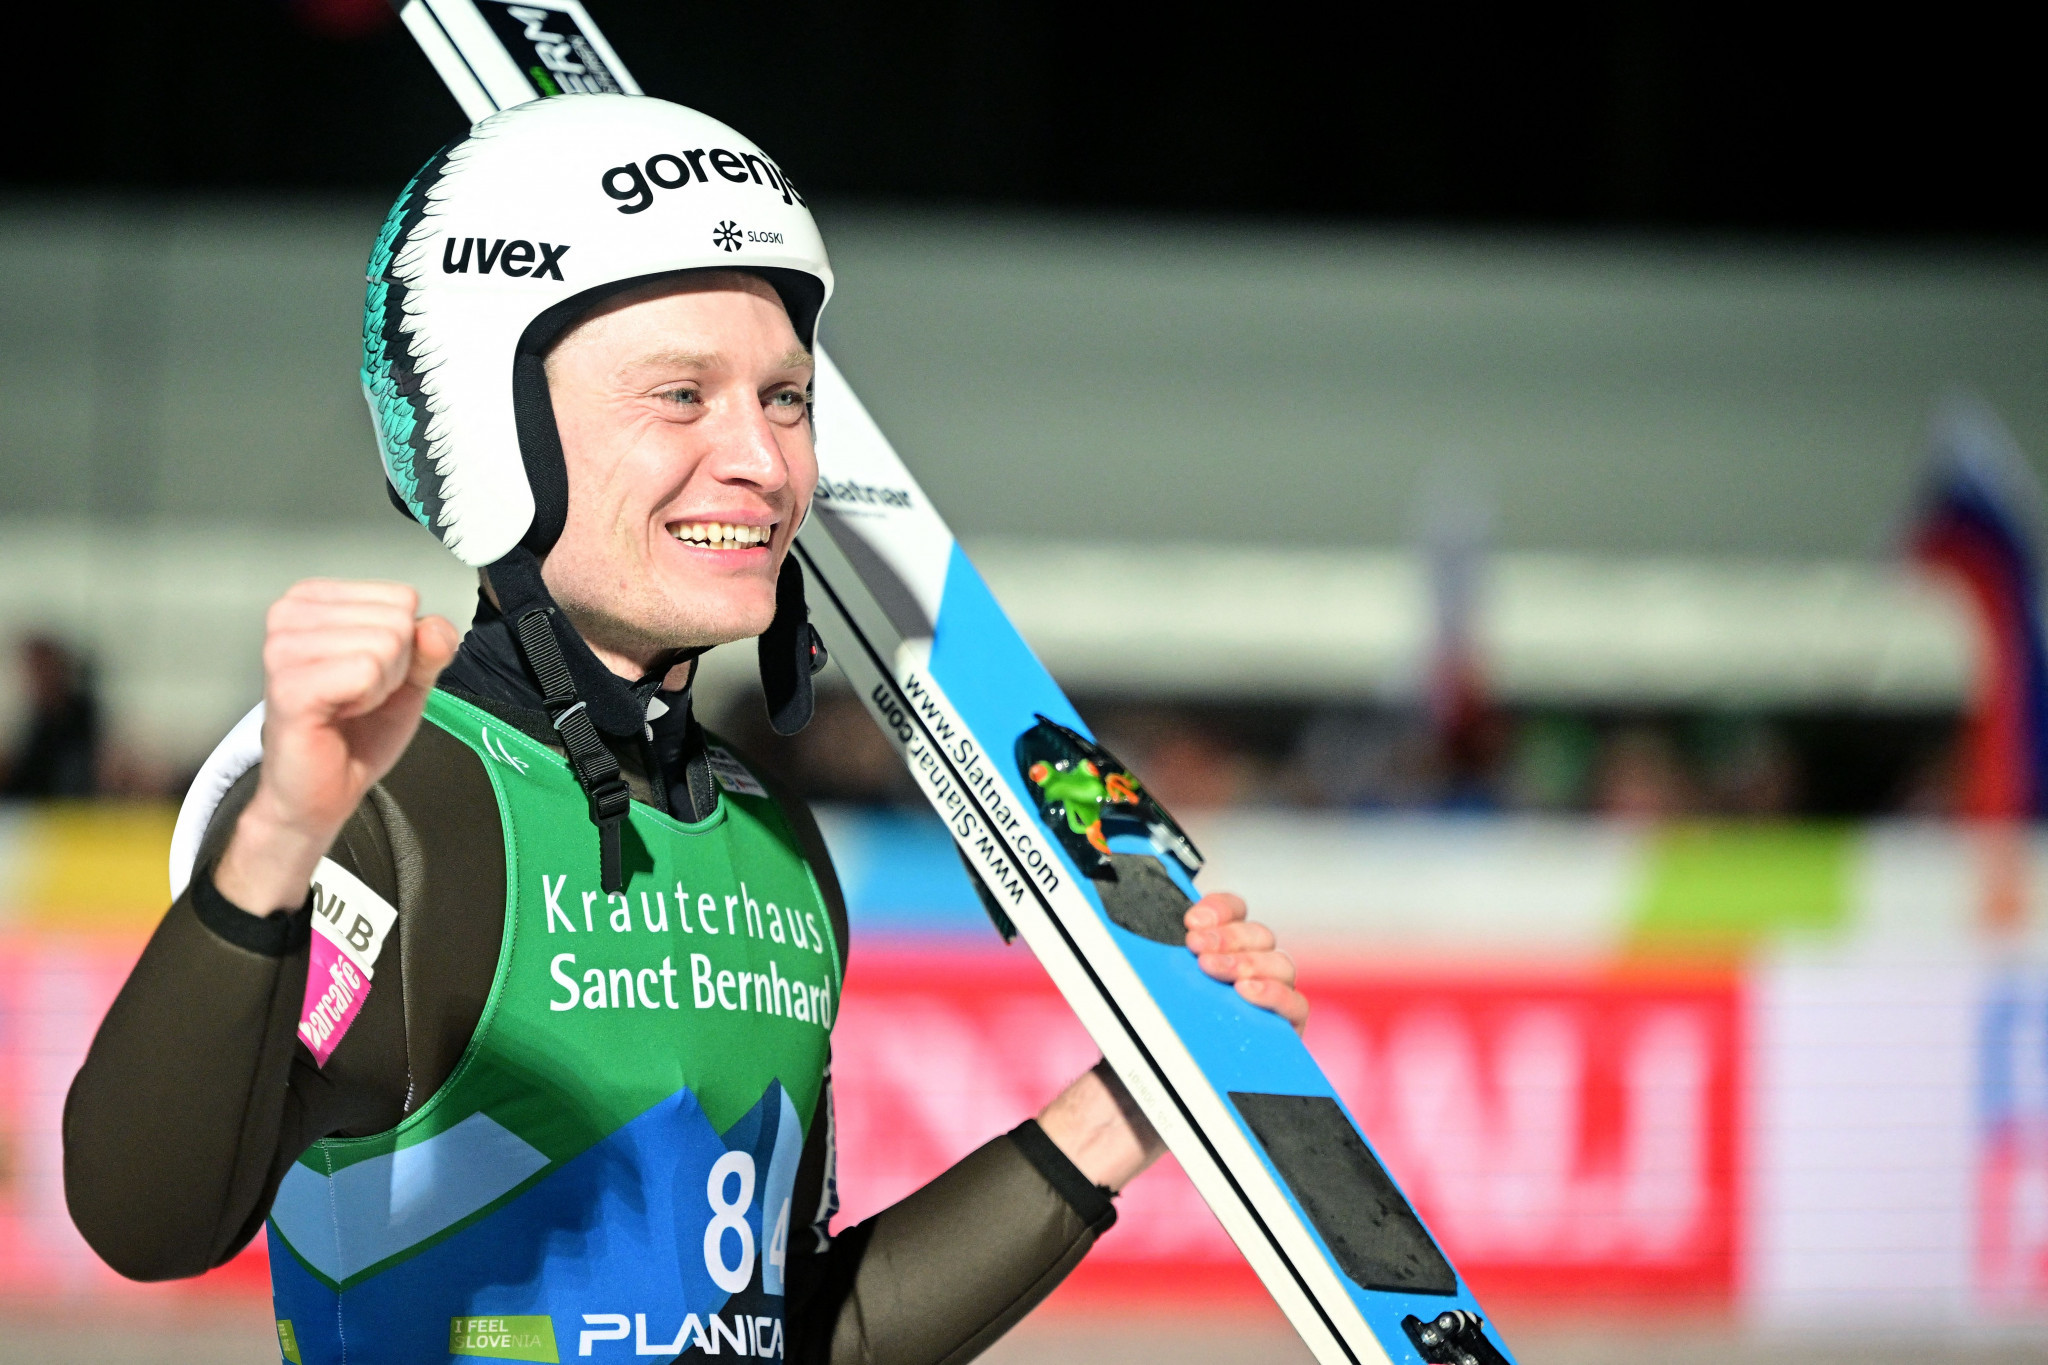 Lanišek and Kreuzer claim victories at Ski Jumping World Cup in Oslo